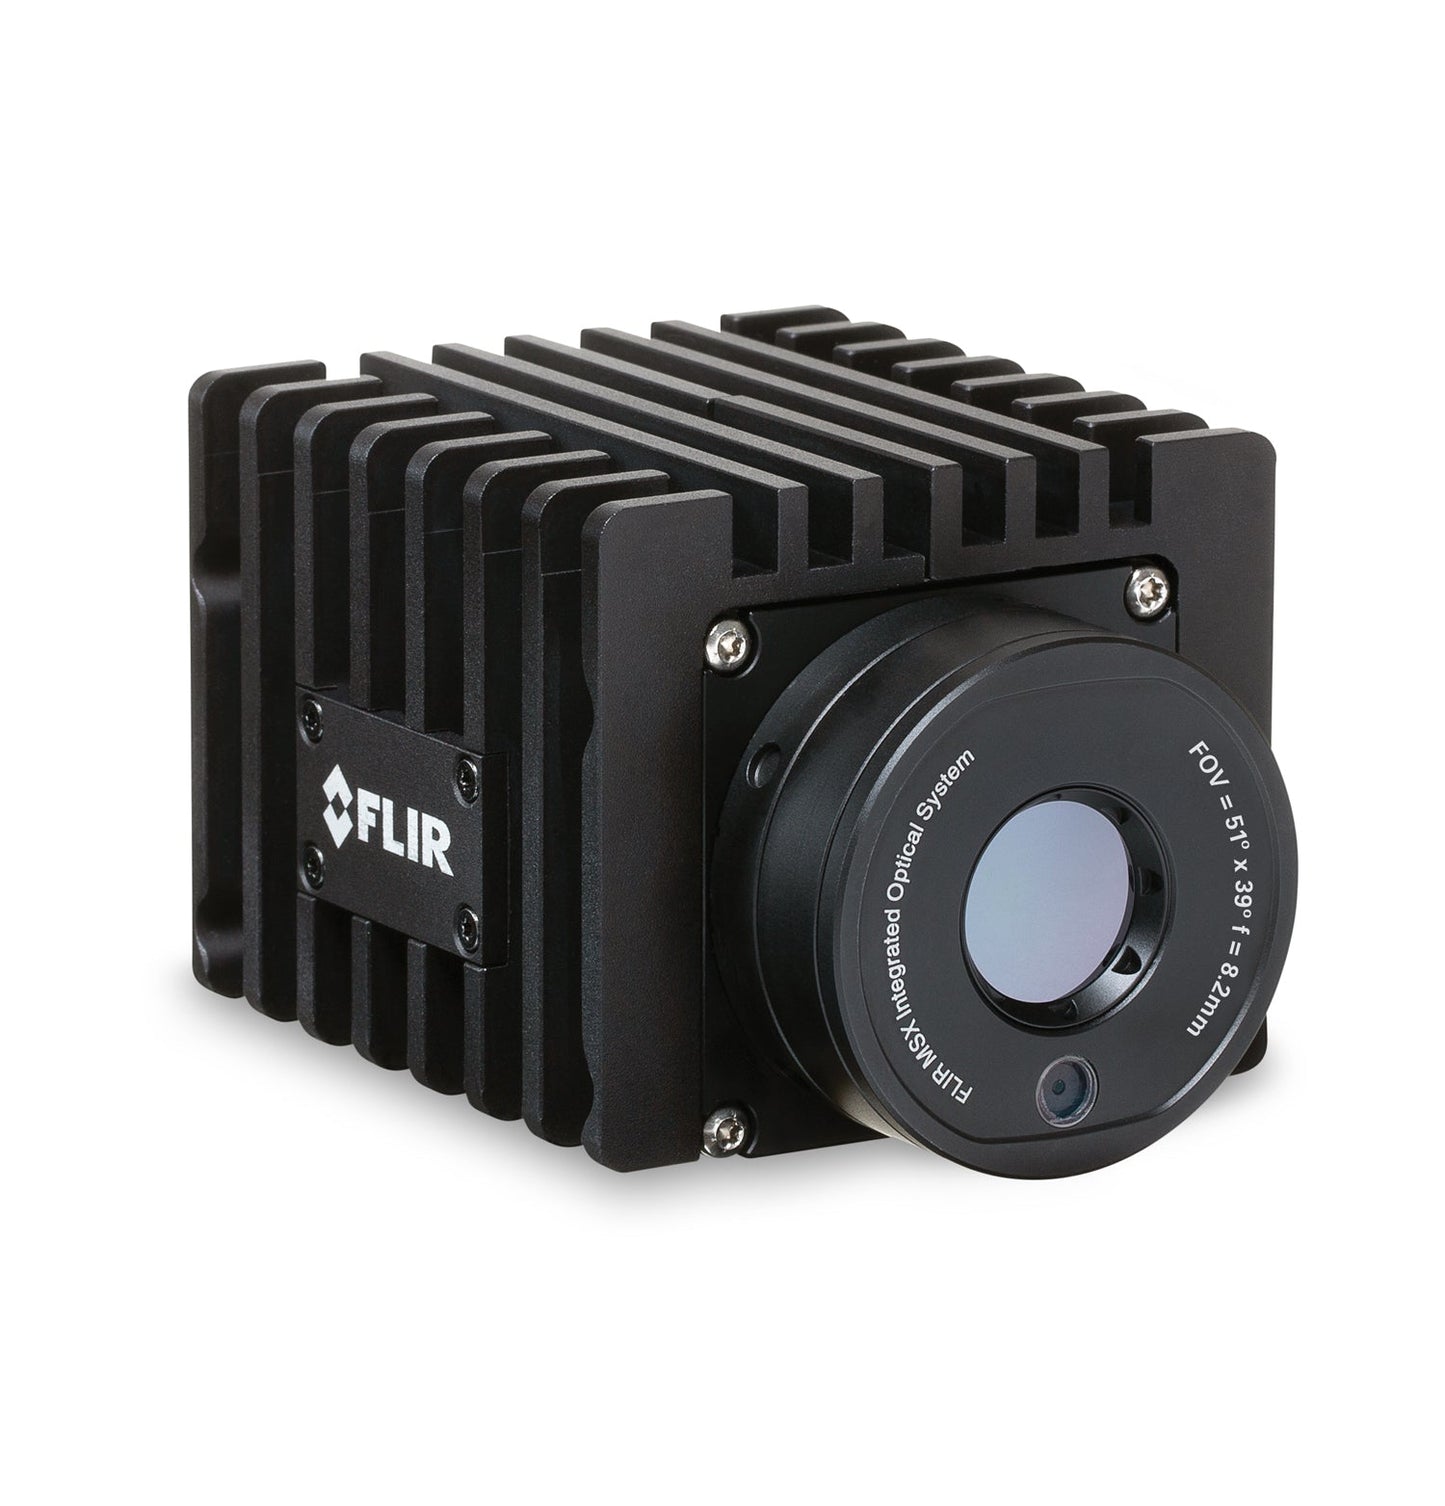 Hire One Day - Teledyne FLIR - A70 51° Professional Science Kit